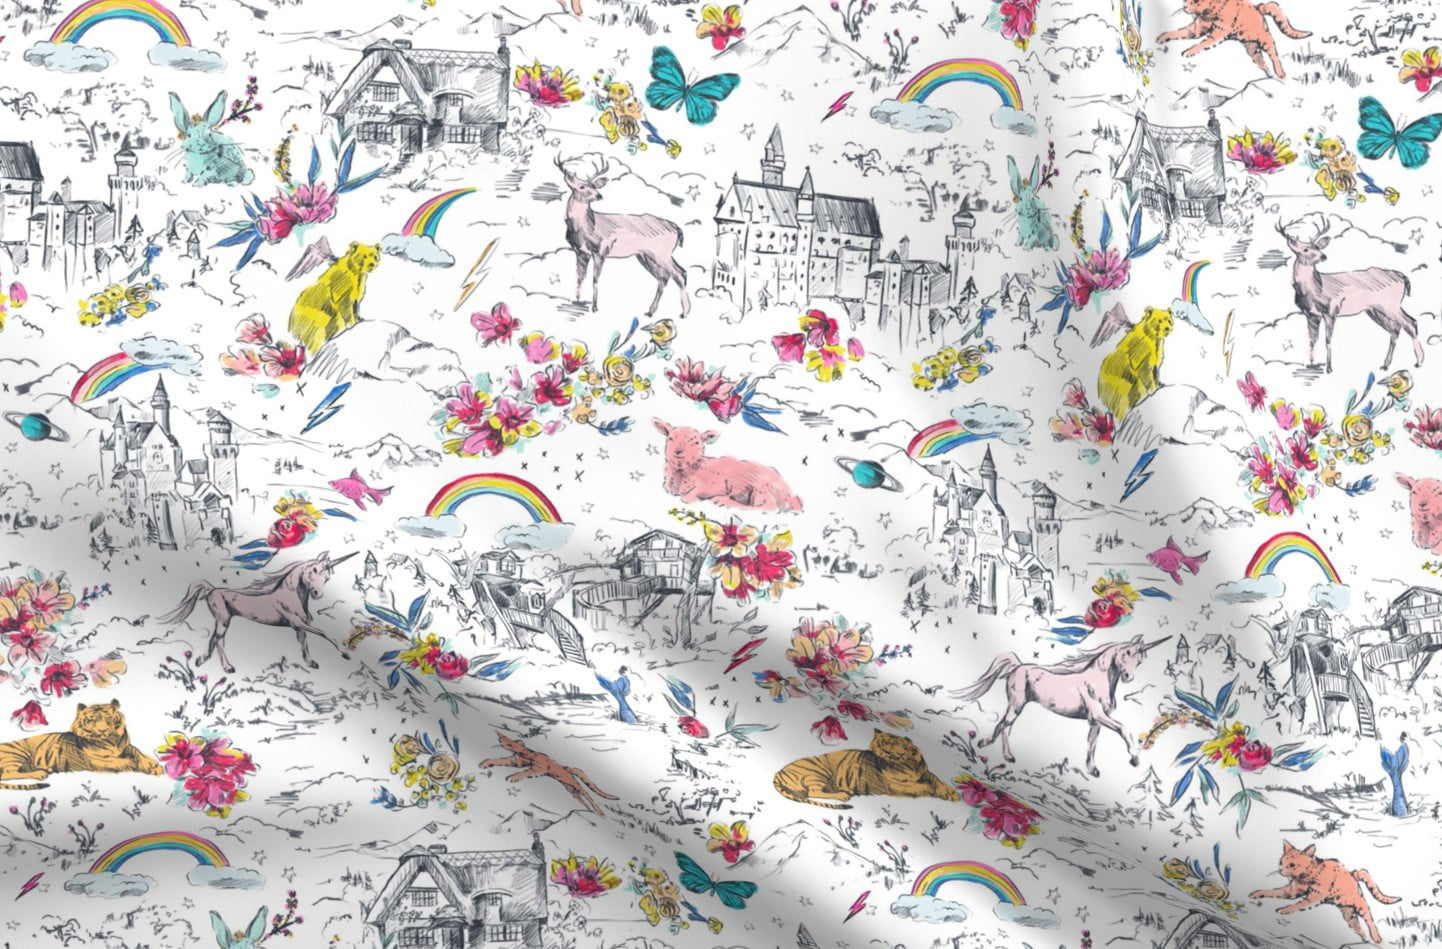 Little Unicorn Rainbow Castle Mermaid Rabbit Butterfly Bear Printed on Basketweave Cotton Canvas Fabric by The Yard Spoonflower Fabric Upholstery Home Decor Bottomweight Apparel 